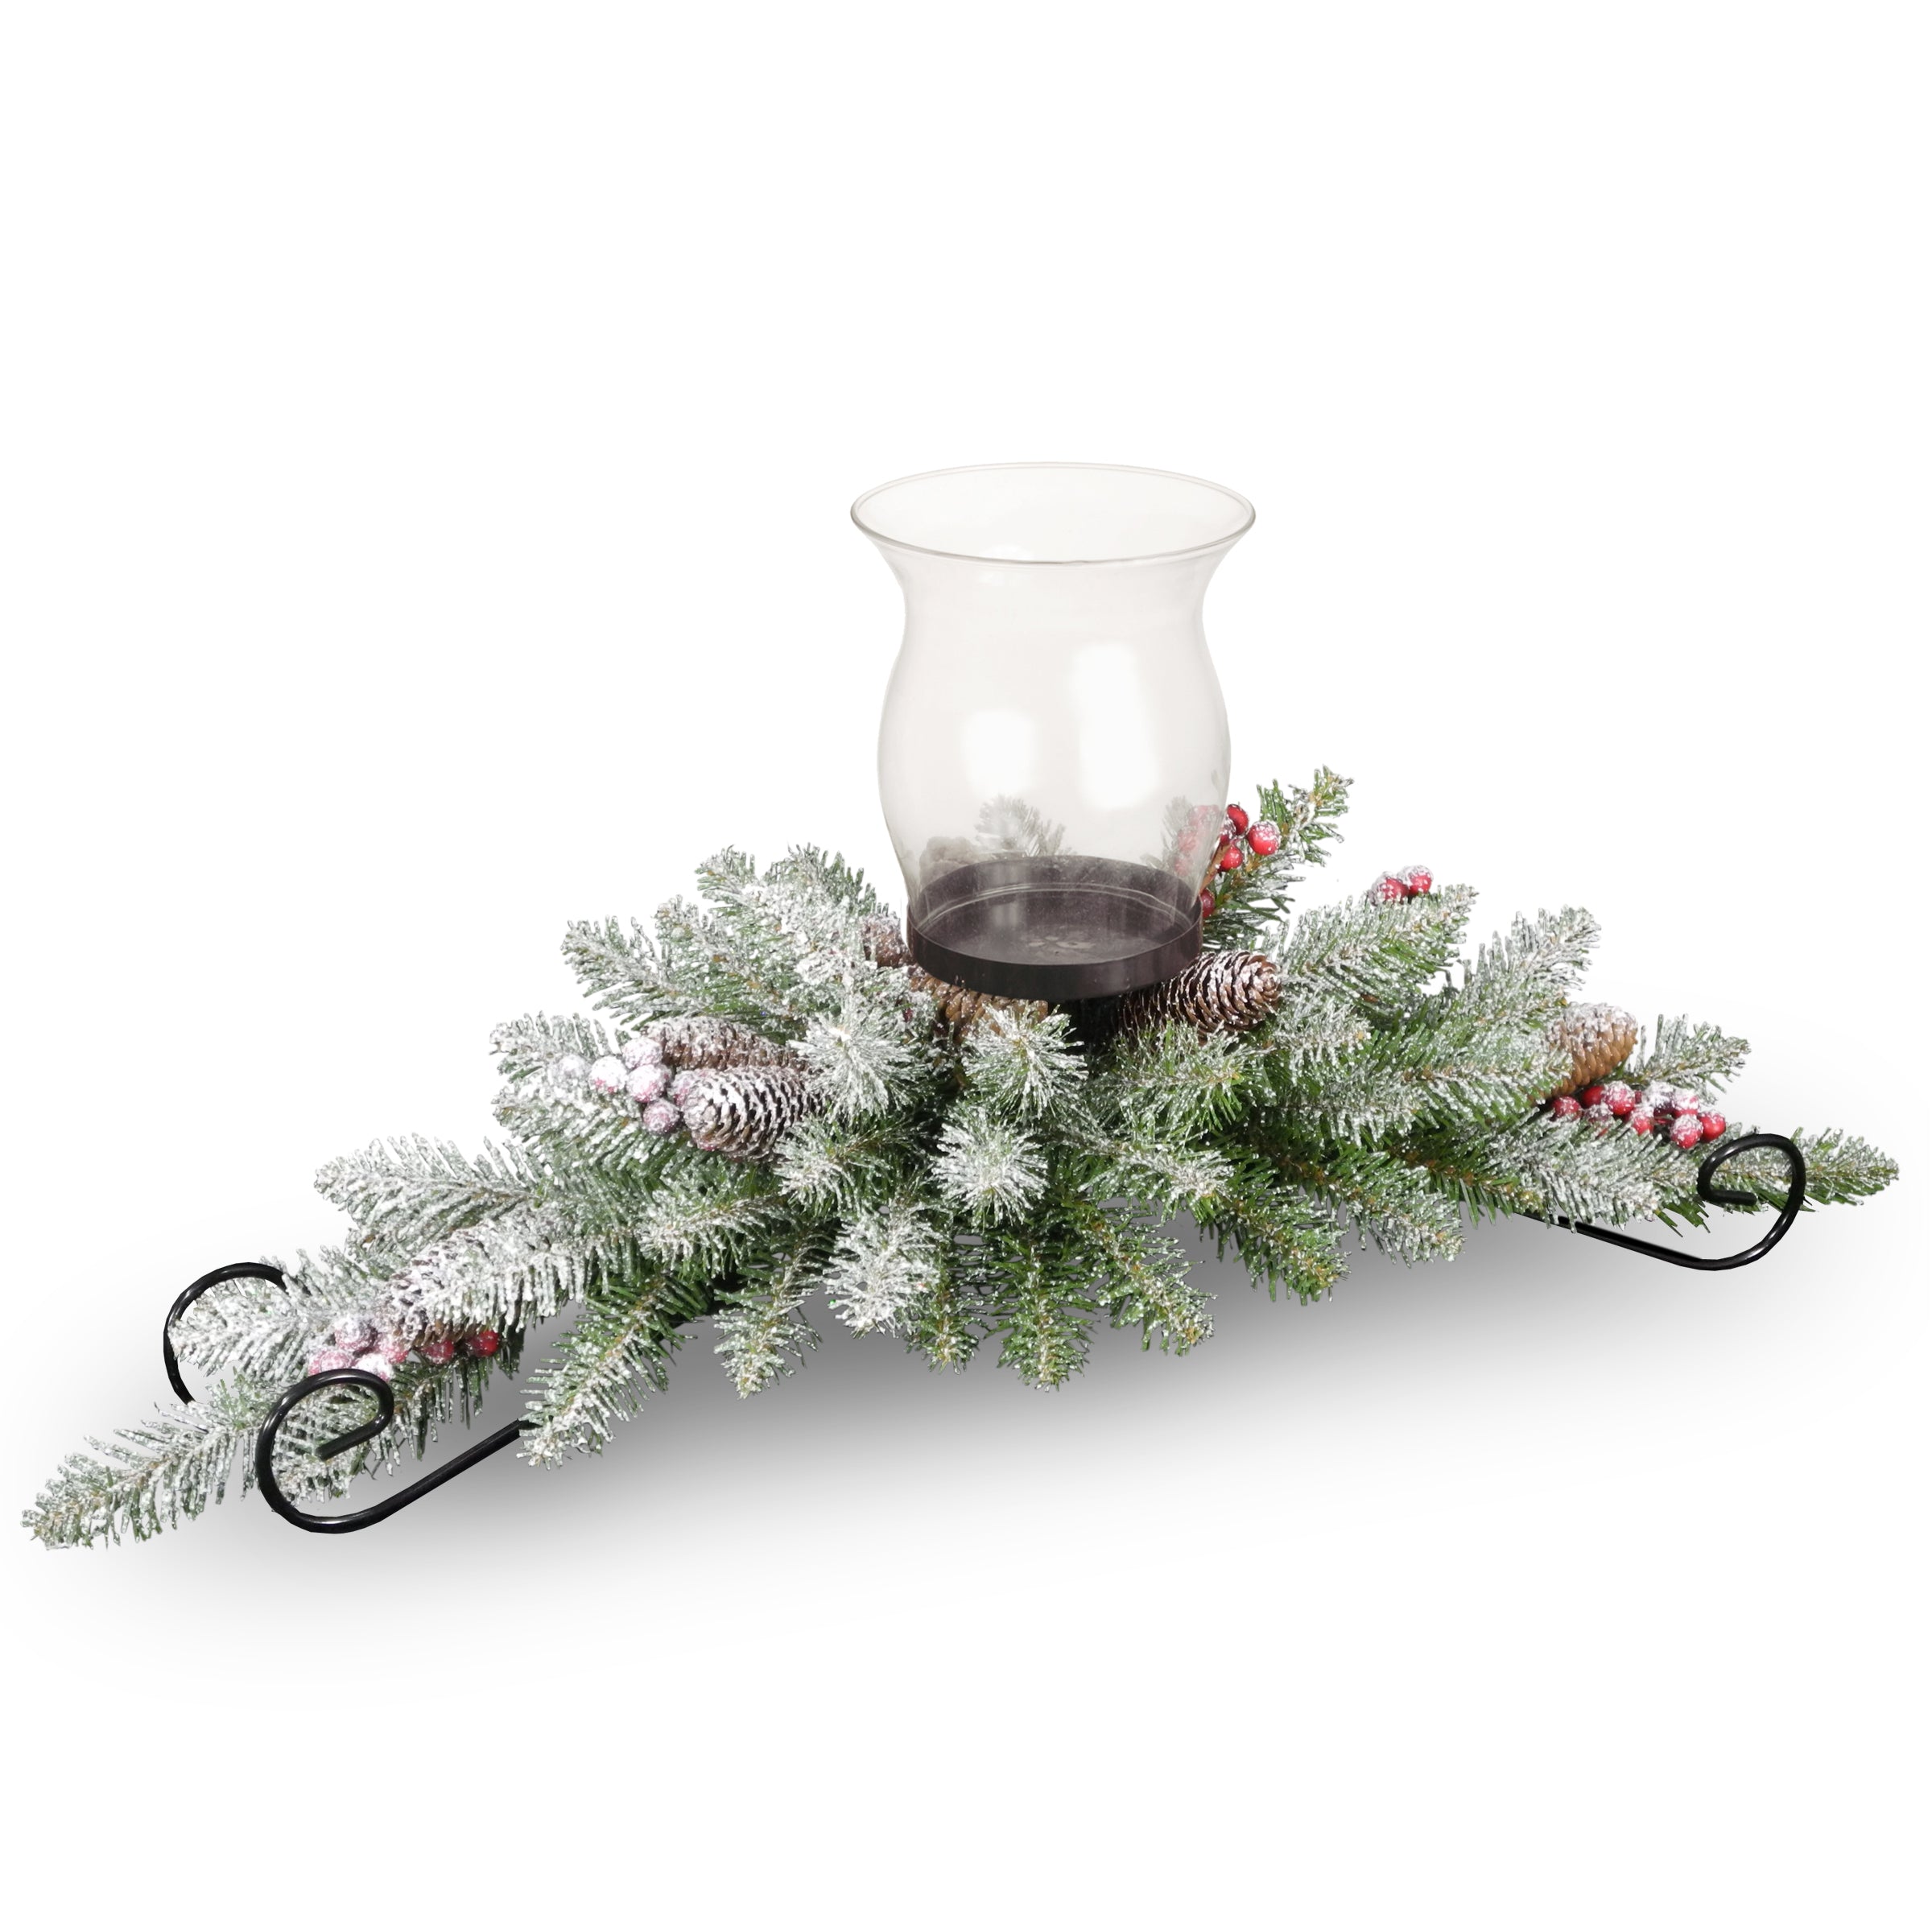 National Tree Duf3-800-30c-a1 30" Dunhill Fir Centerpiece And Candle Holder With Snow, Berries And Cones